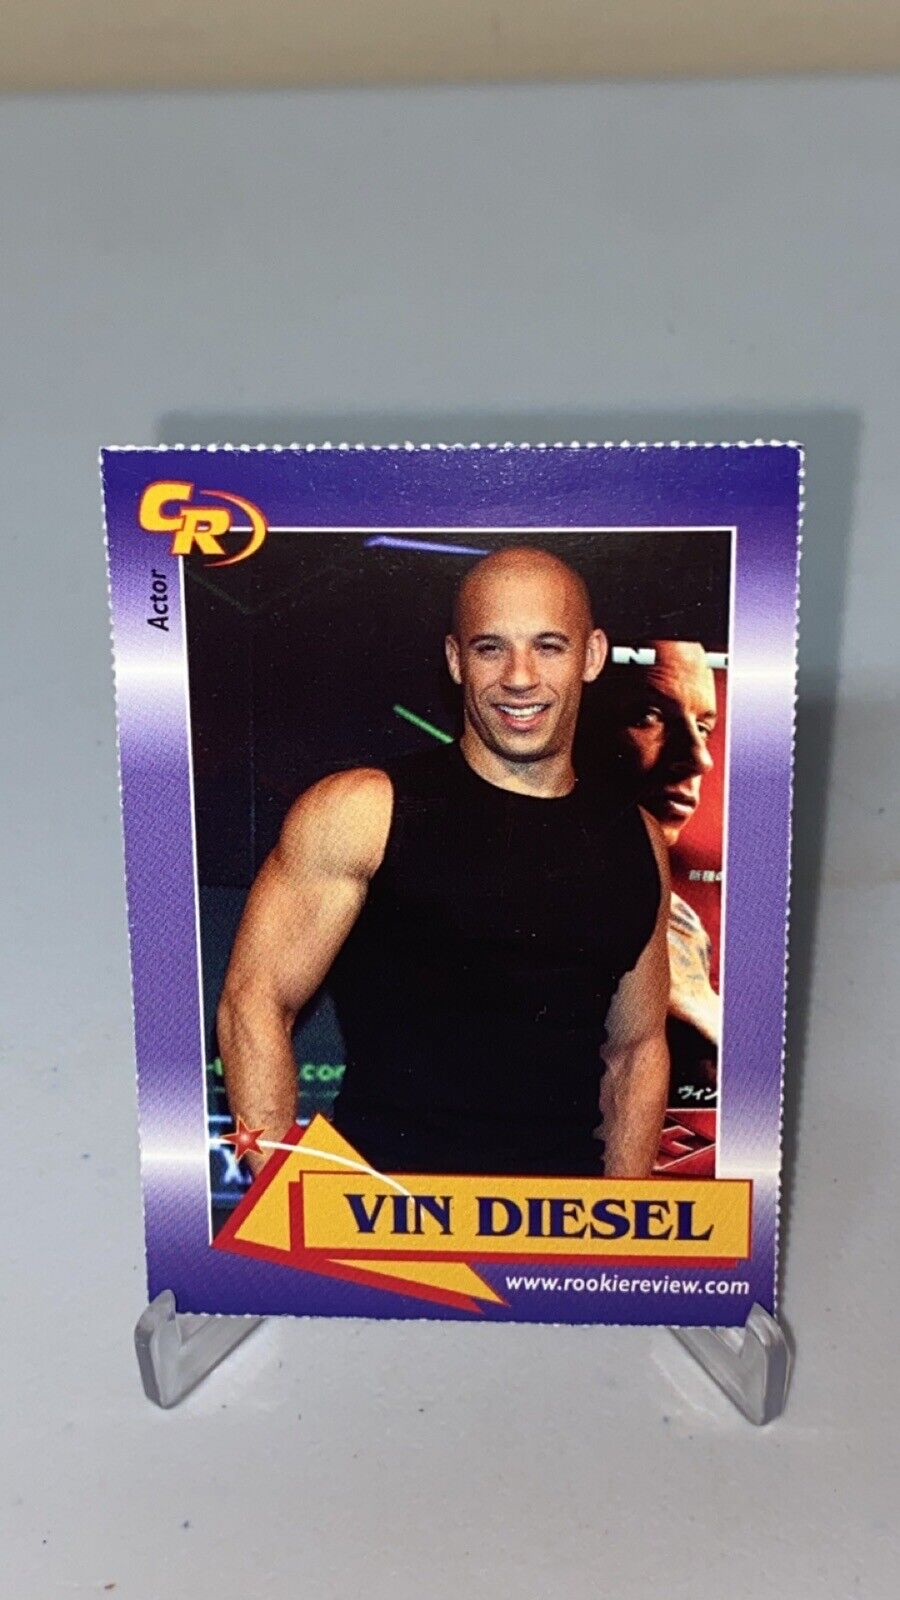 2003 Celebrity Review Vin Diesel Rookie Review Actor Card #12 Fast & Furious